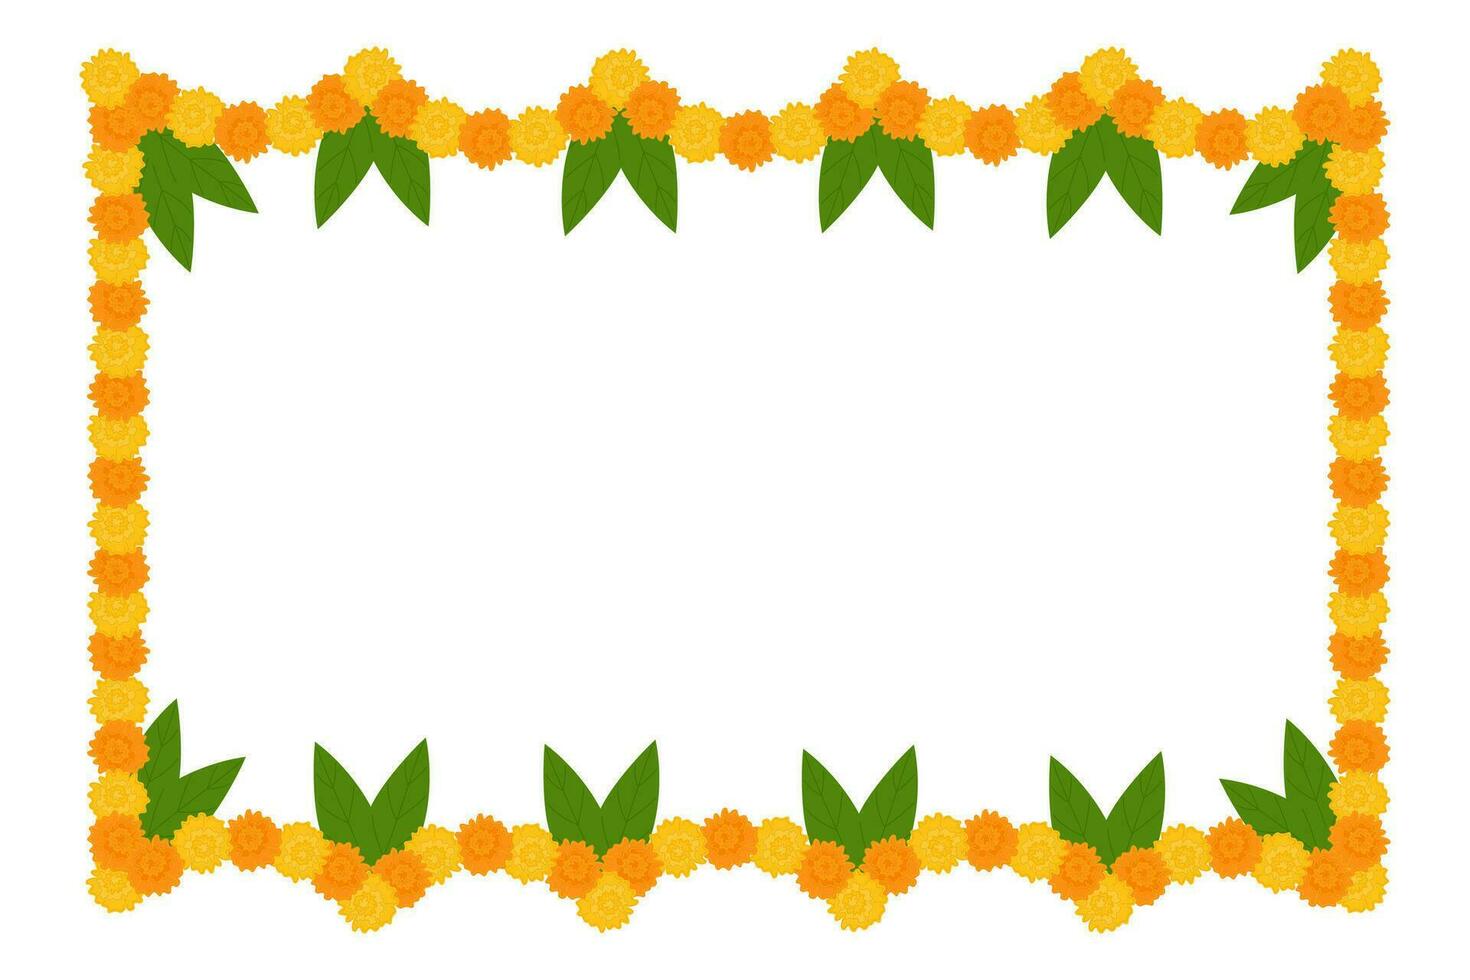 Traditional Indian flower garland with marigold flowers and mango leaves. Decoration for Indian Hindu holidays. Vector illustration isolated on white background.